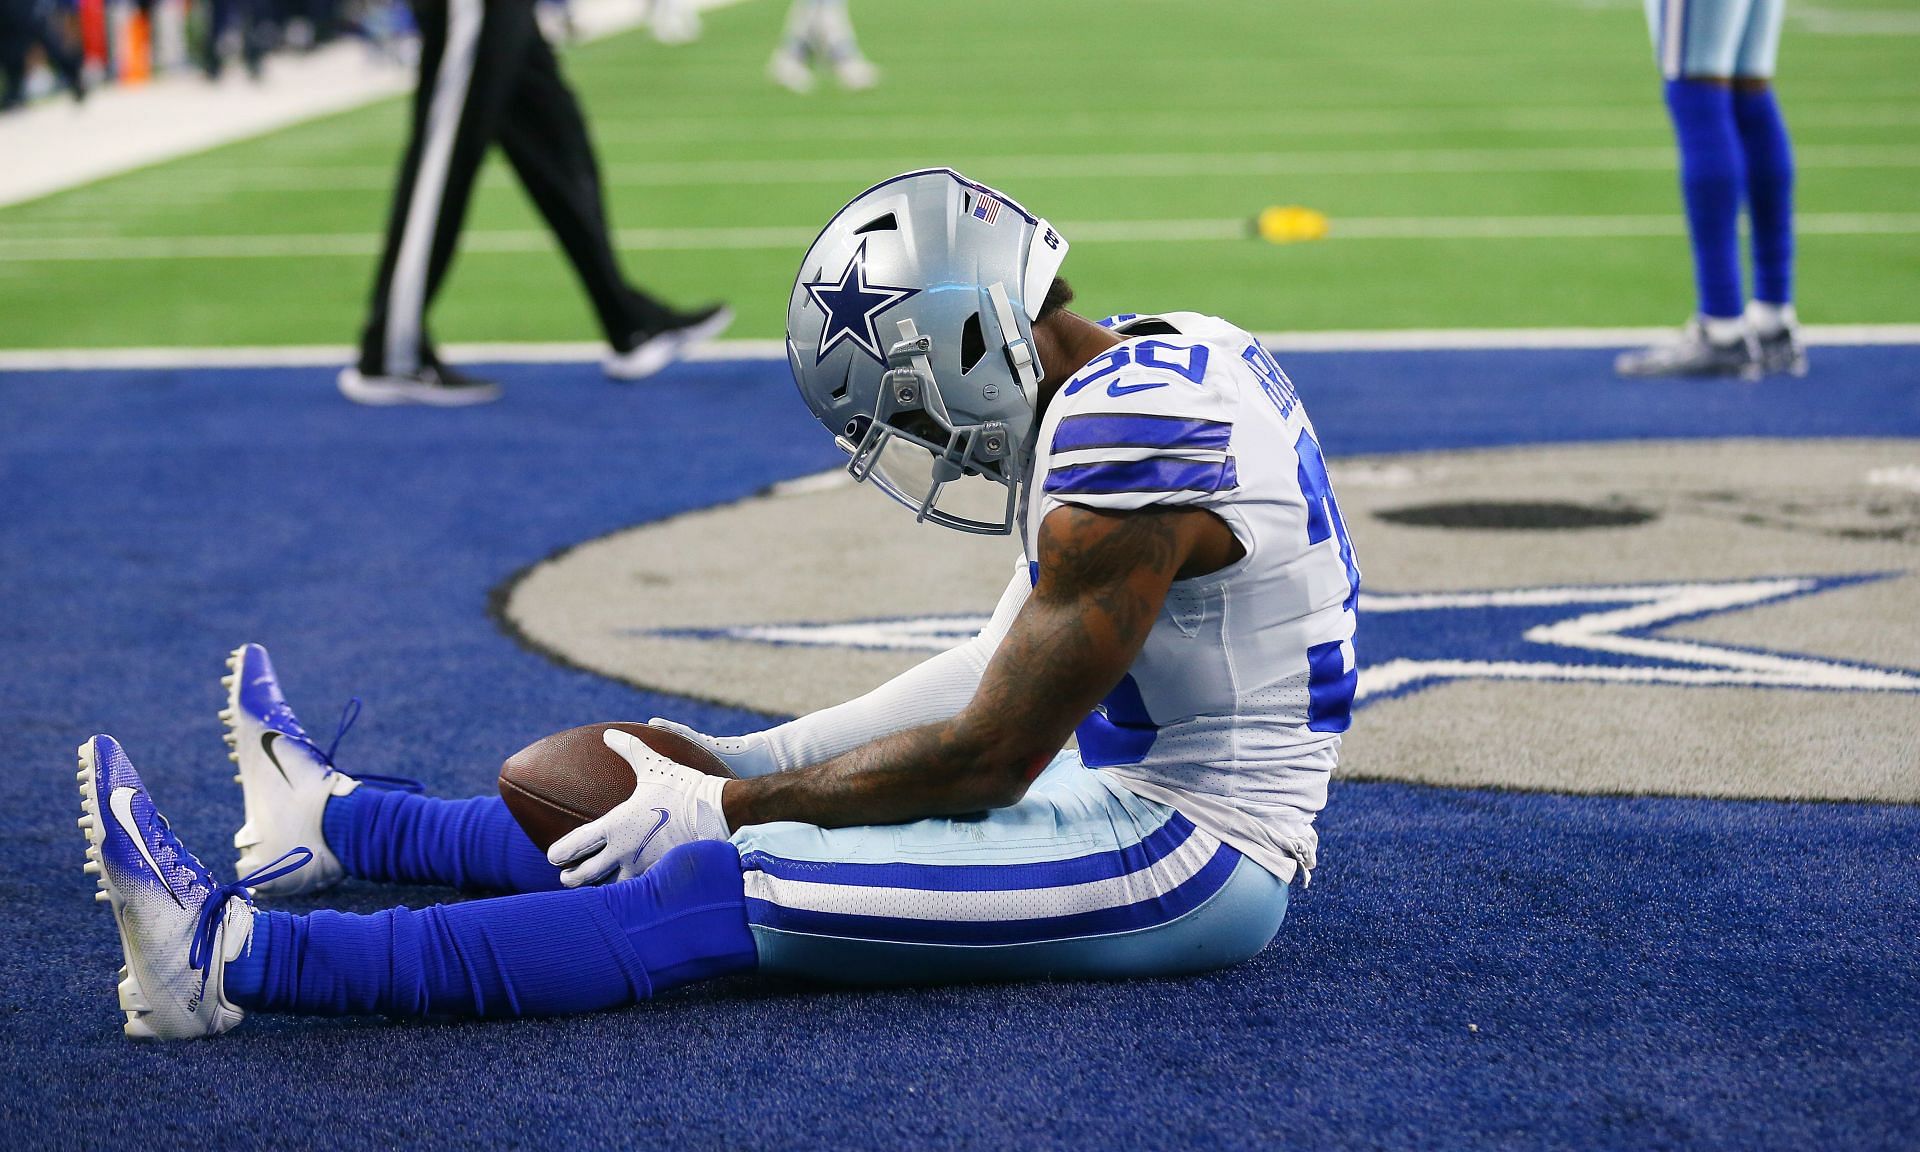 Dallas Cowboys cornerback Anthony Brown who was penalized four times